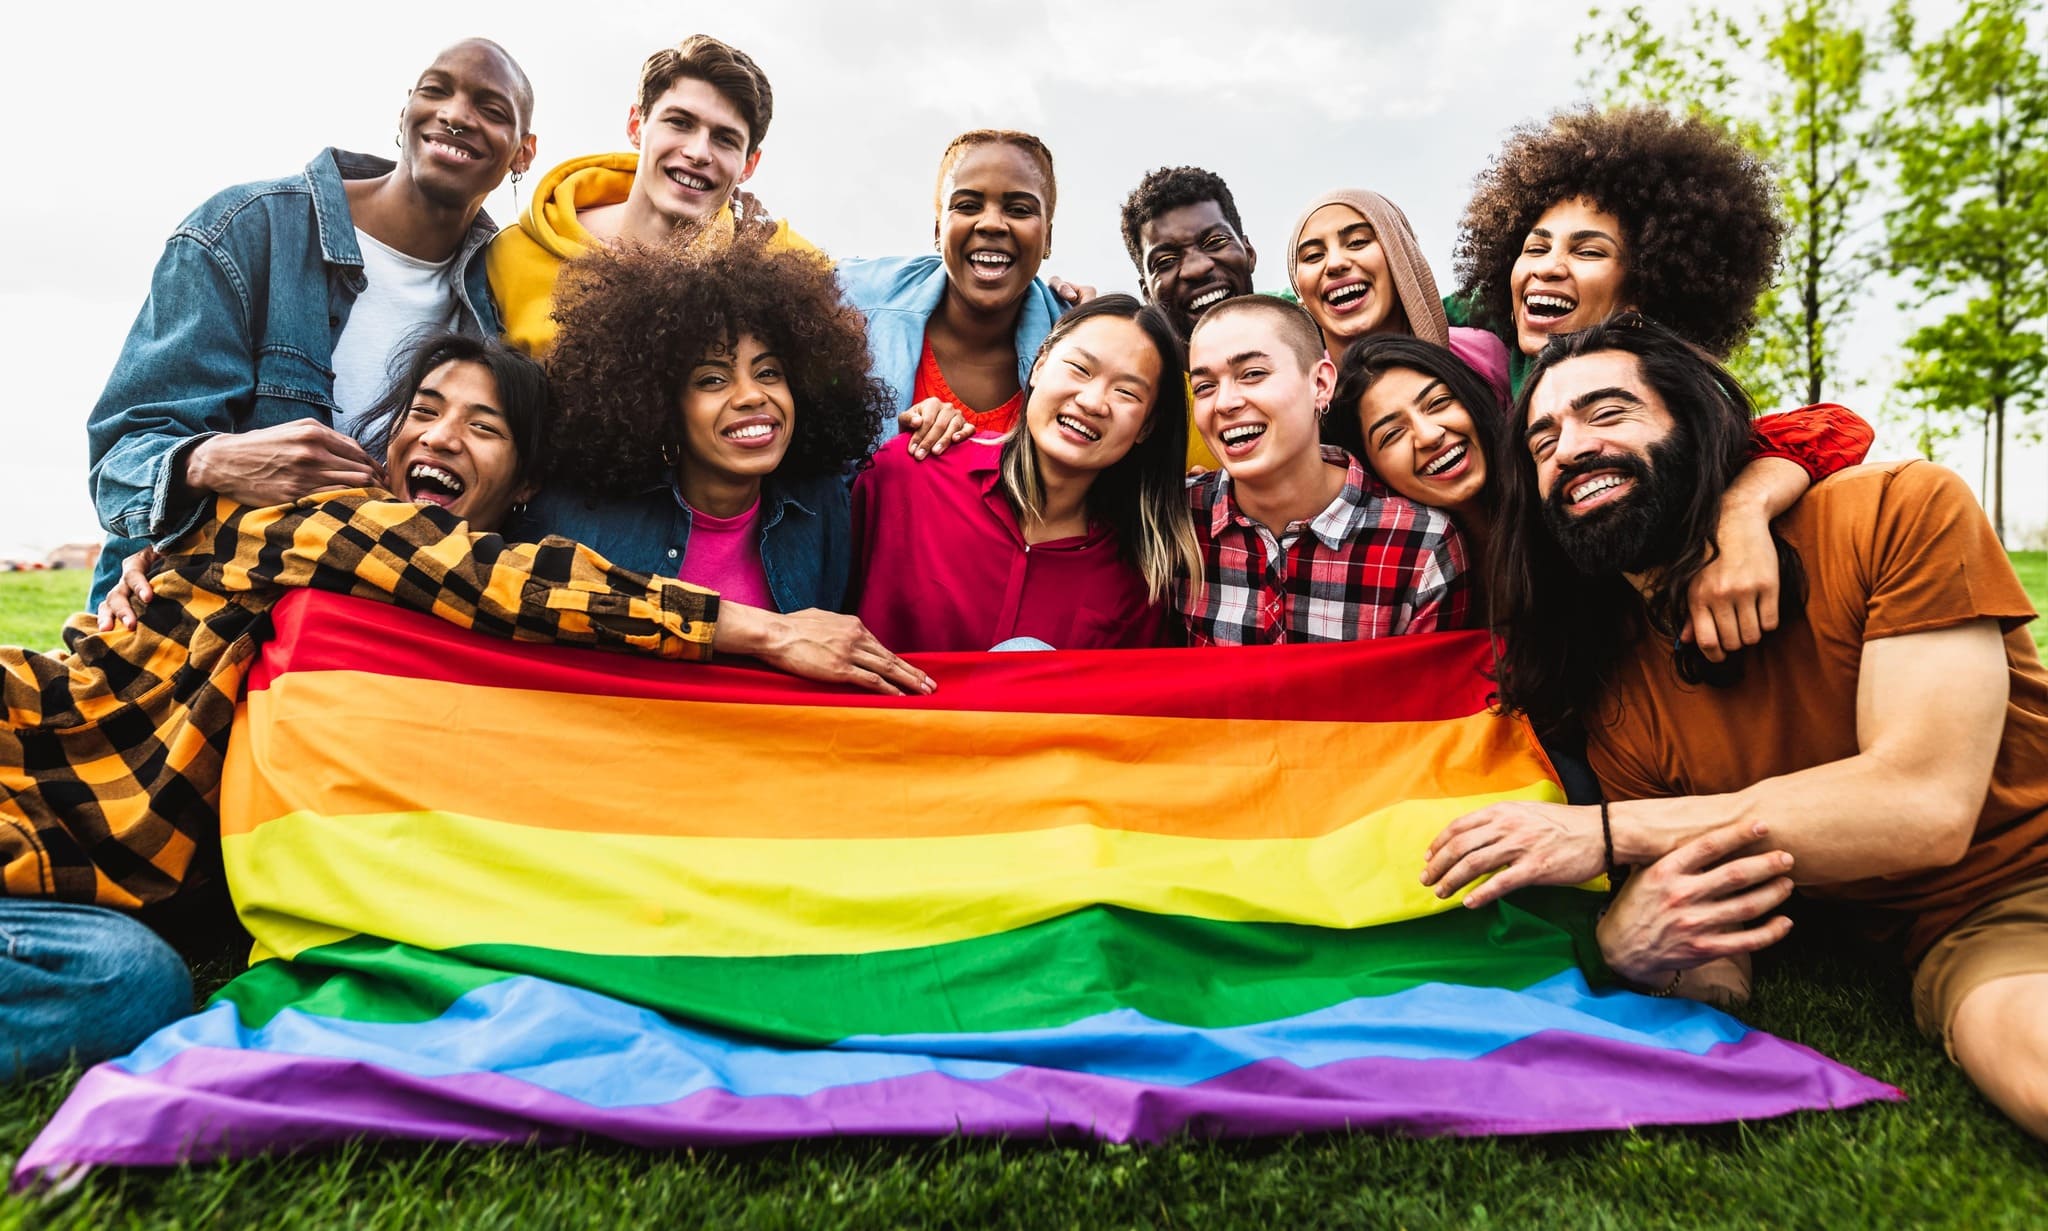 Pride store for LGBTQ clothing & accessories - group of young people holding the rainbow flag